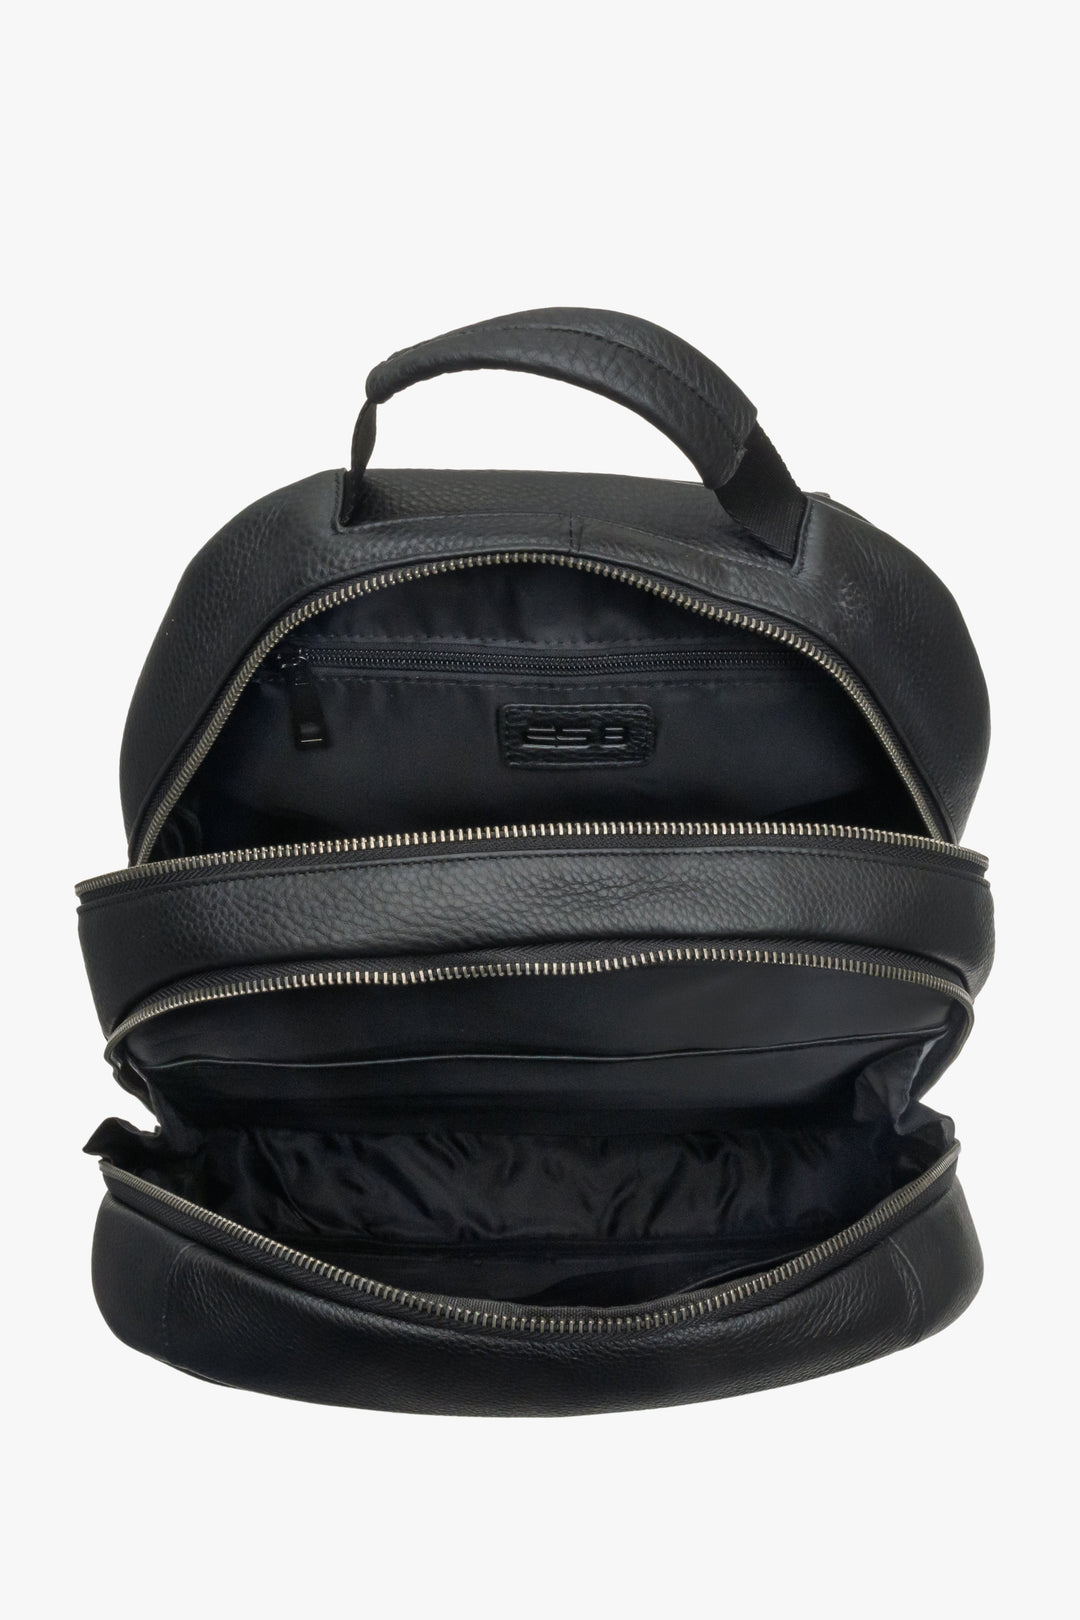 A spacious men's  black leather backpack from ES8 - close-up on the interior of the model.